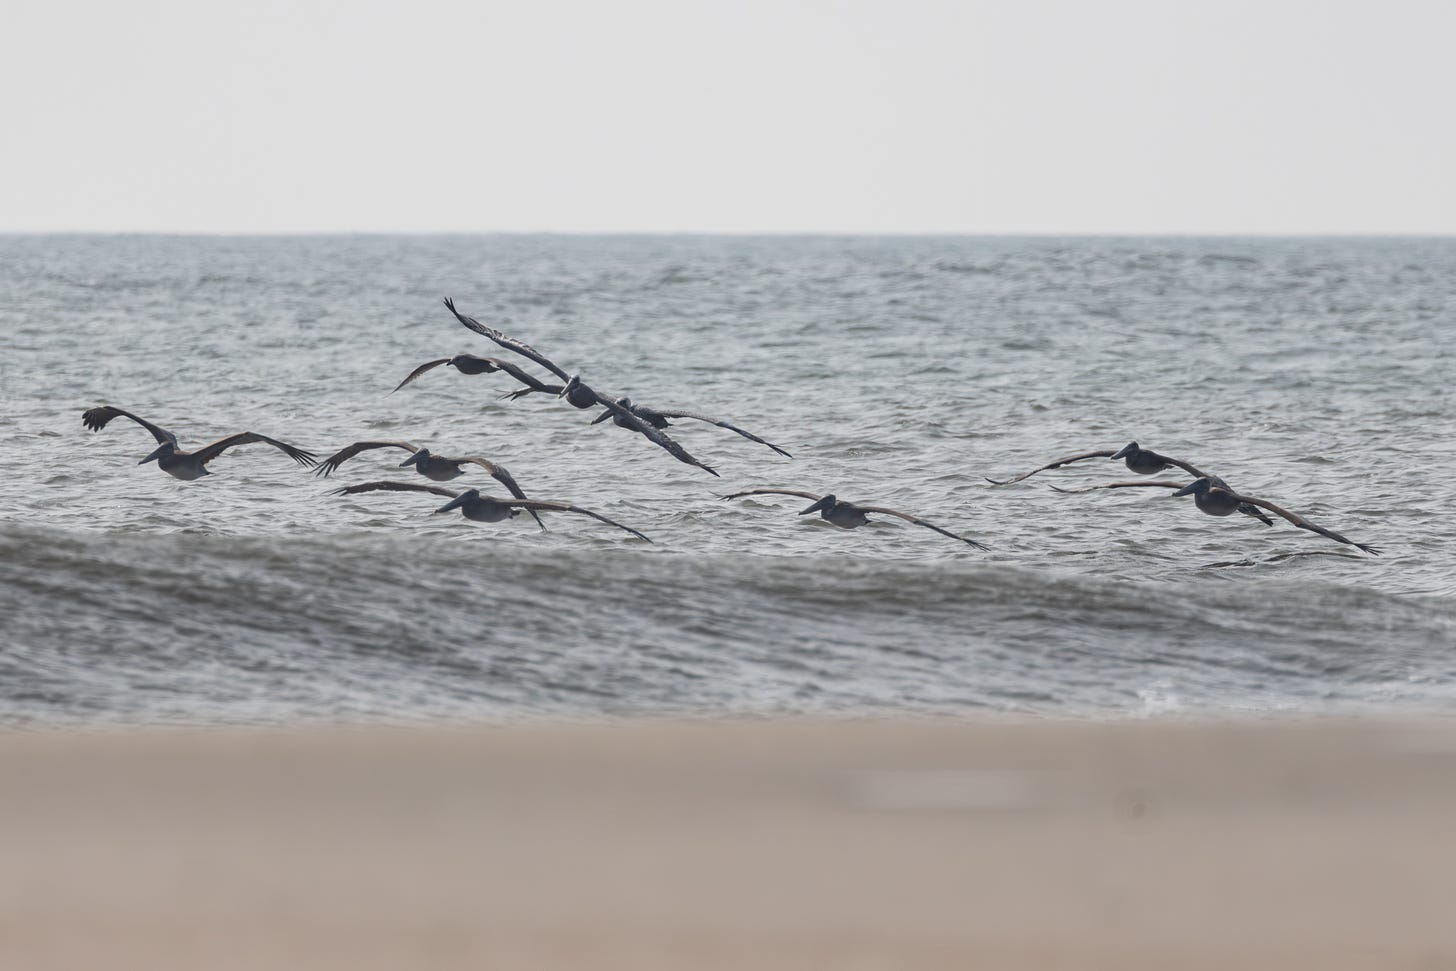 eight brown pelicans flying to the left along the beach. the third bird from the left is an immature herring gull.